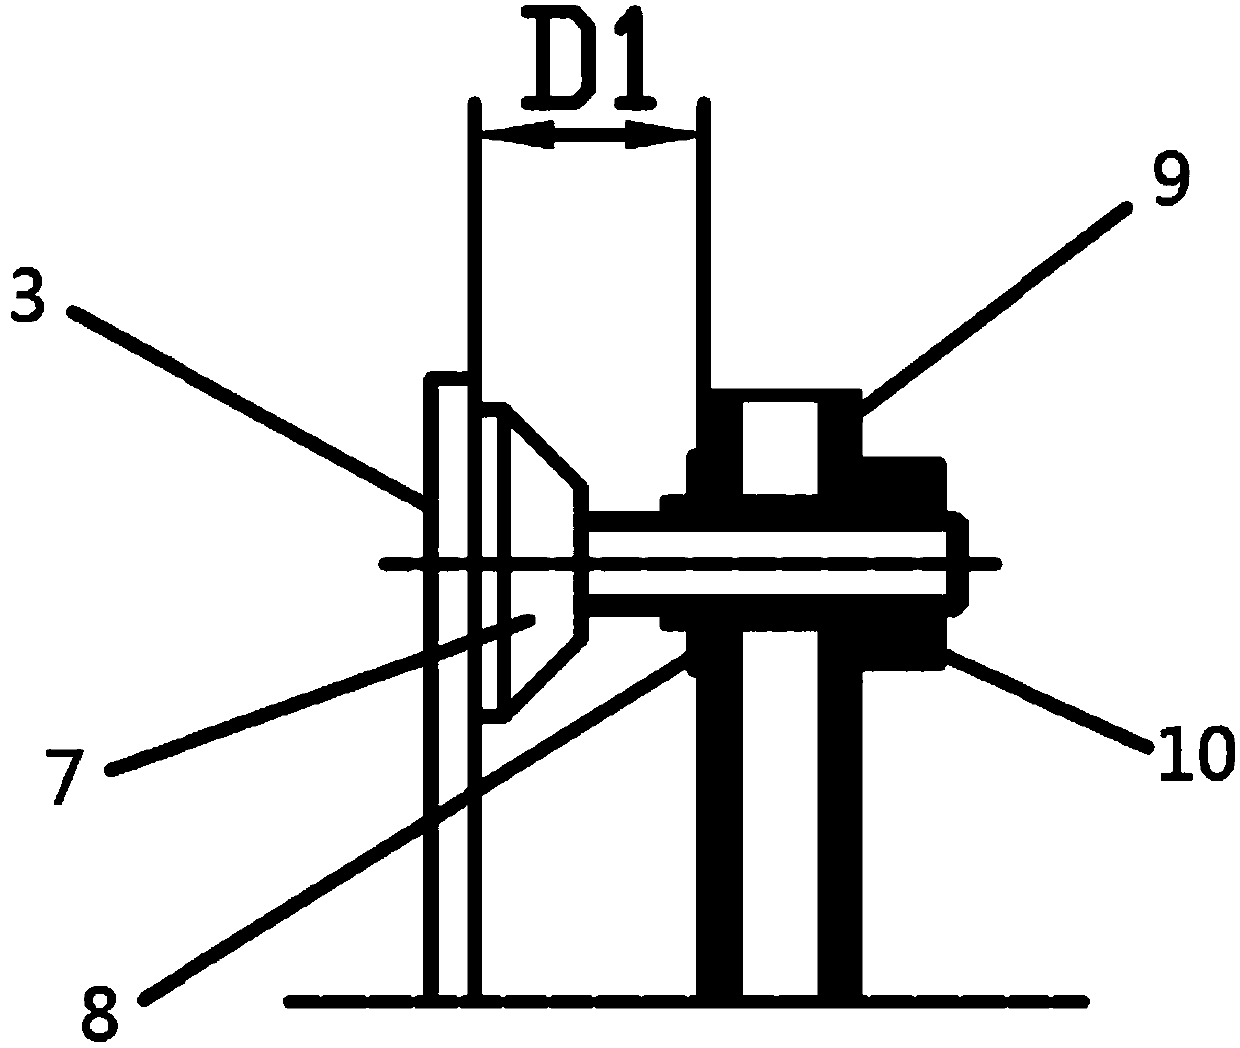 Parallel projection device